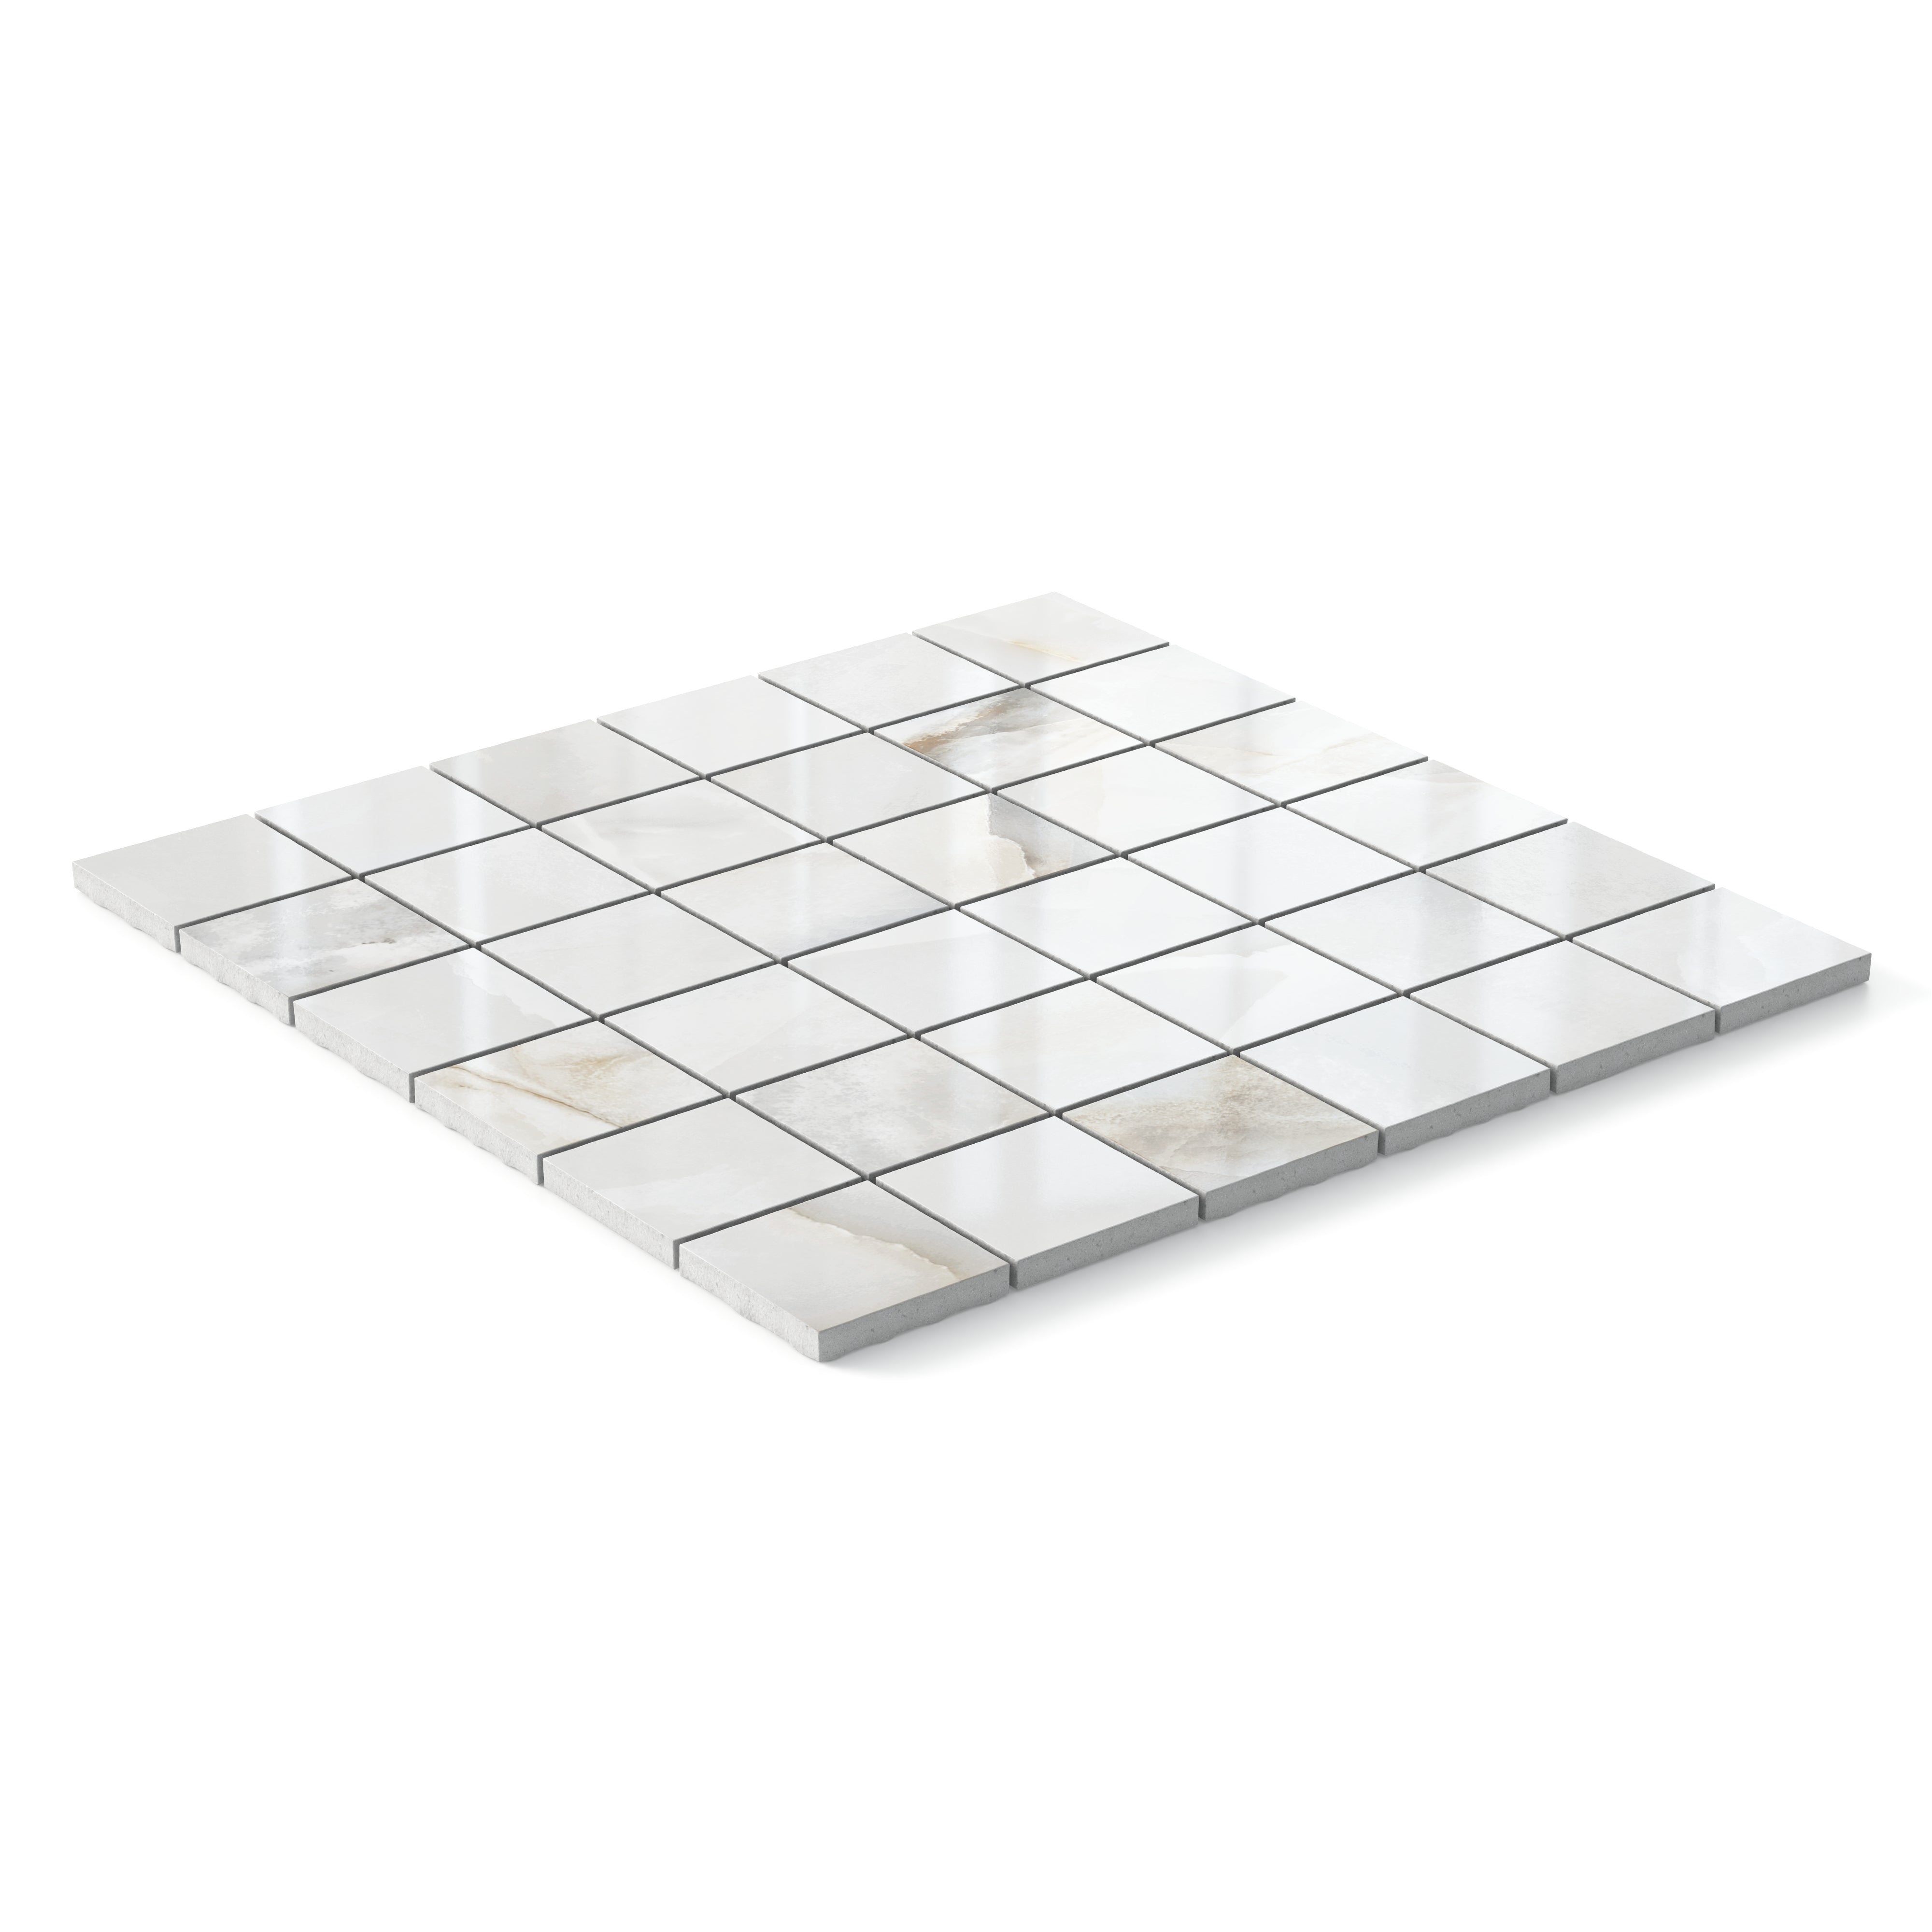 Astrid 2x2 Polished Porcelain Mosaic Tile in Pearl